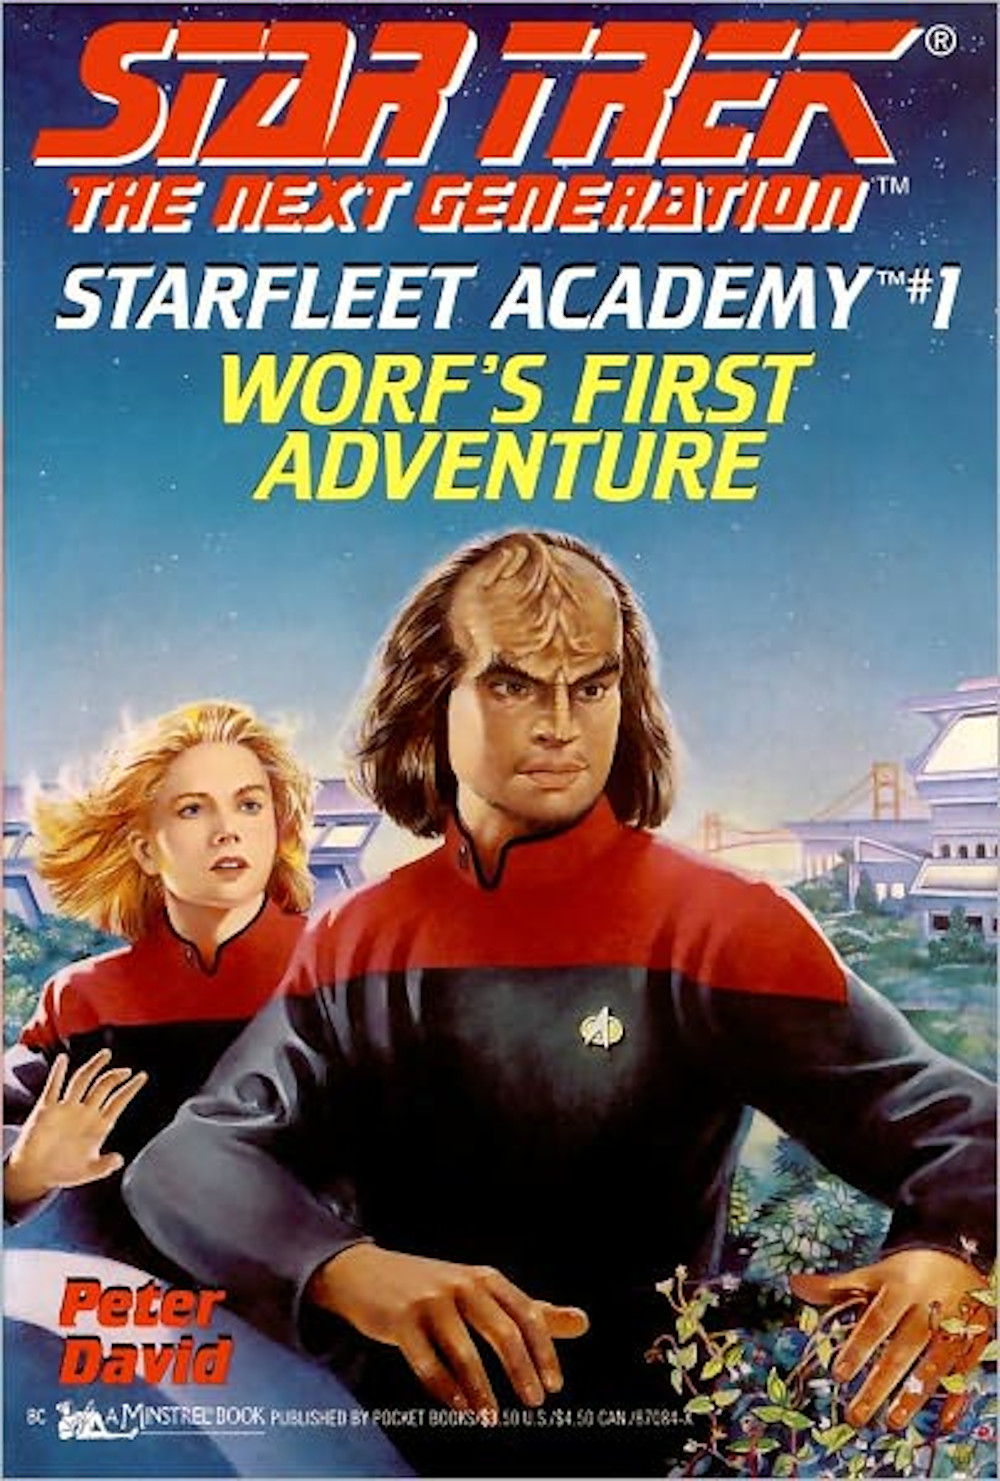 Worf's First Adventure (Aug 1993)